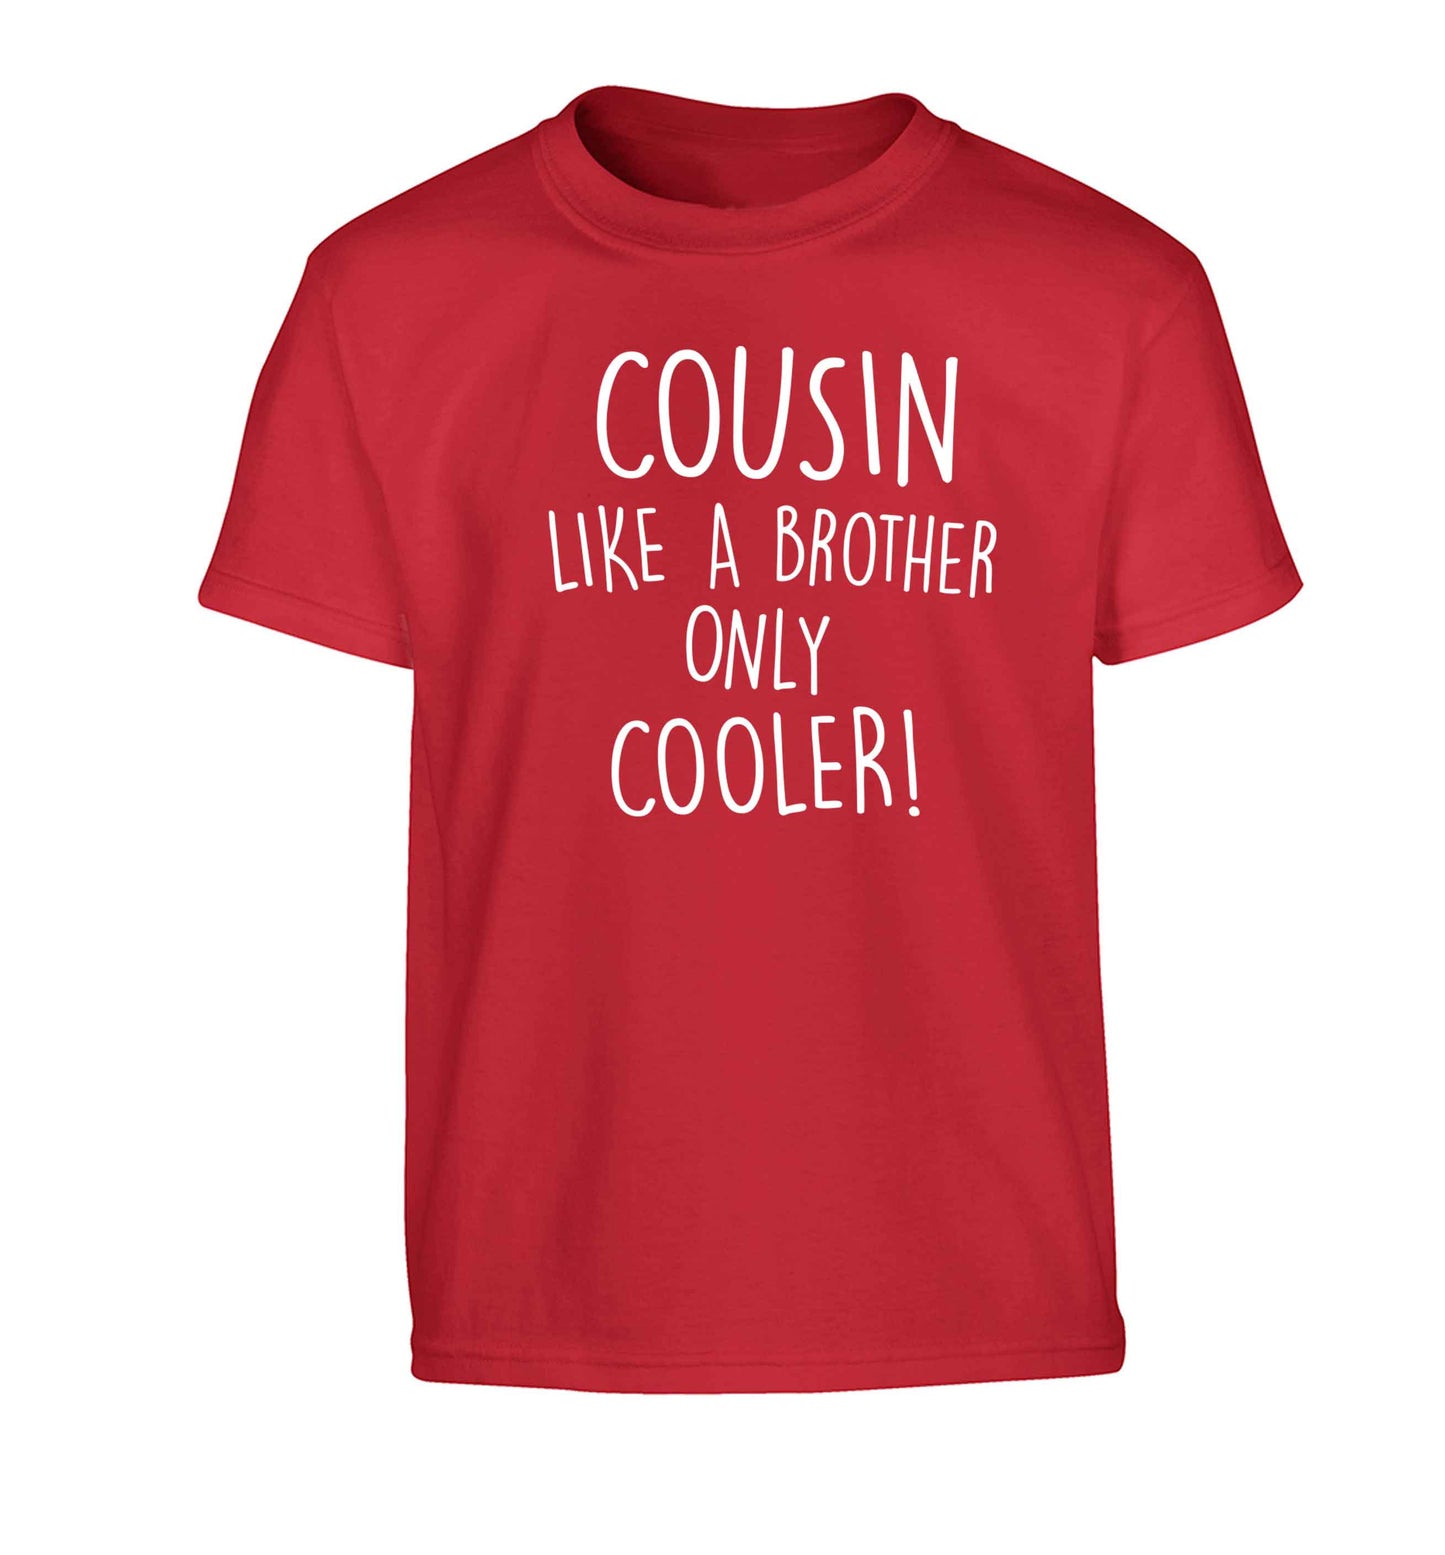 Cousin like a brother only cooler Children's red Tshirt 12-13 Years